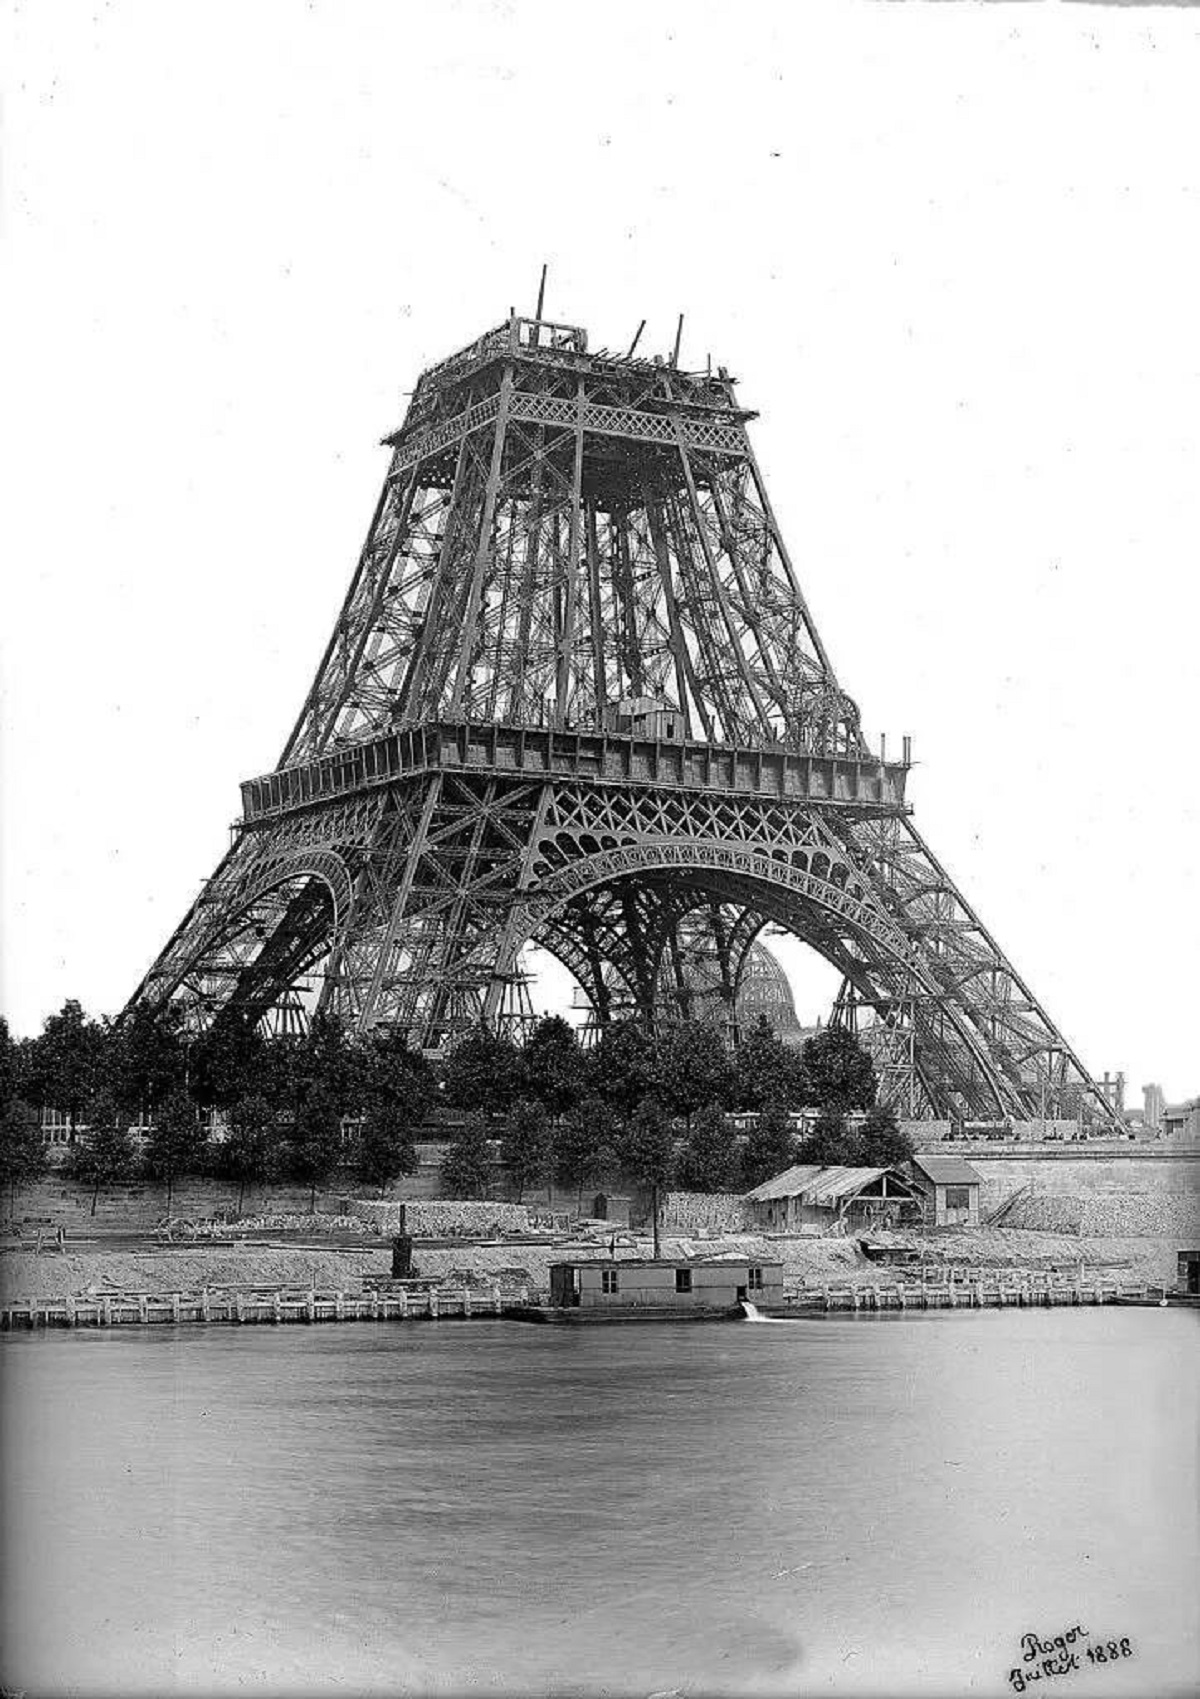 This is what the Eiffel Tower looked like while it was under construction: